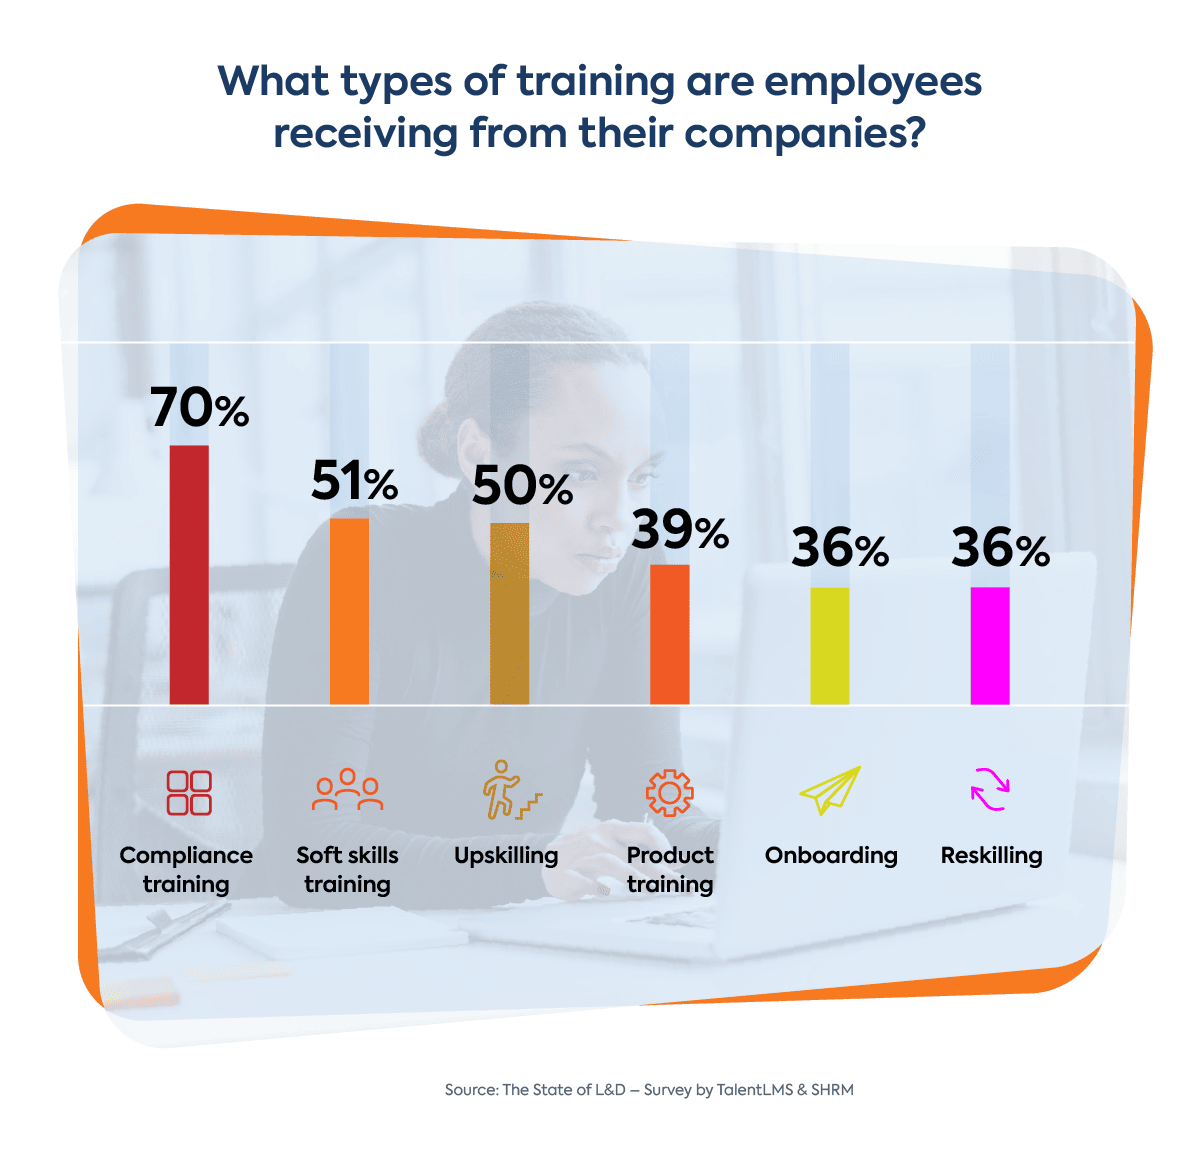 Type of training employees are receiving from their companies